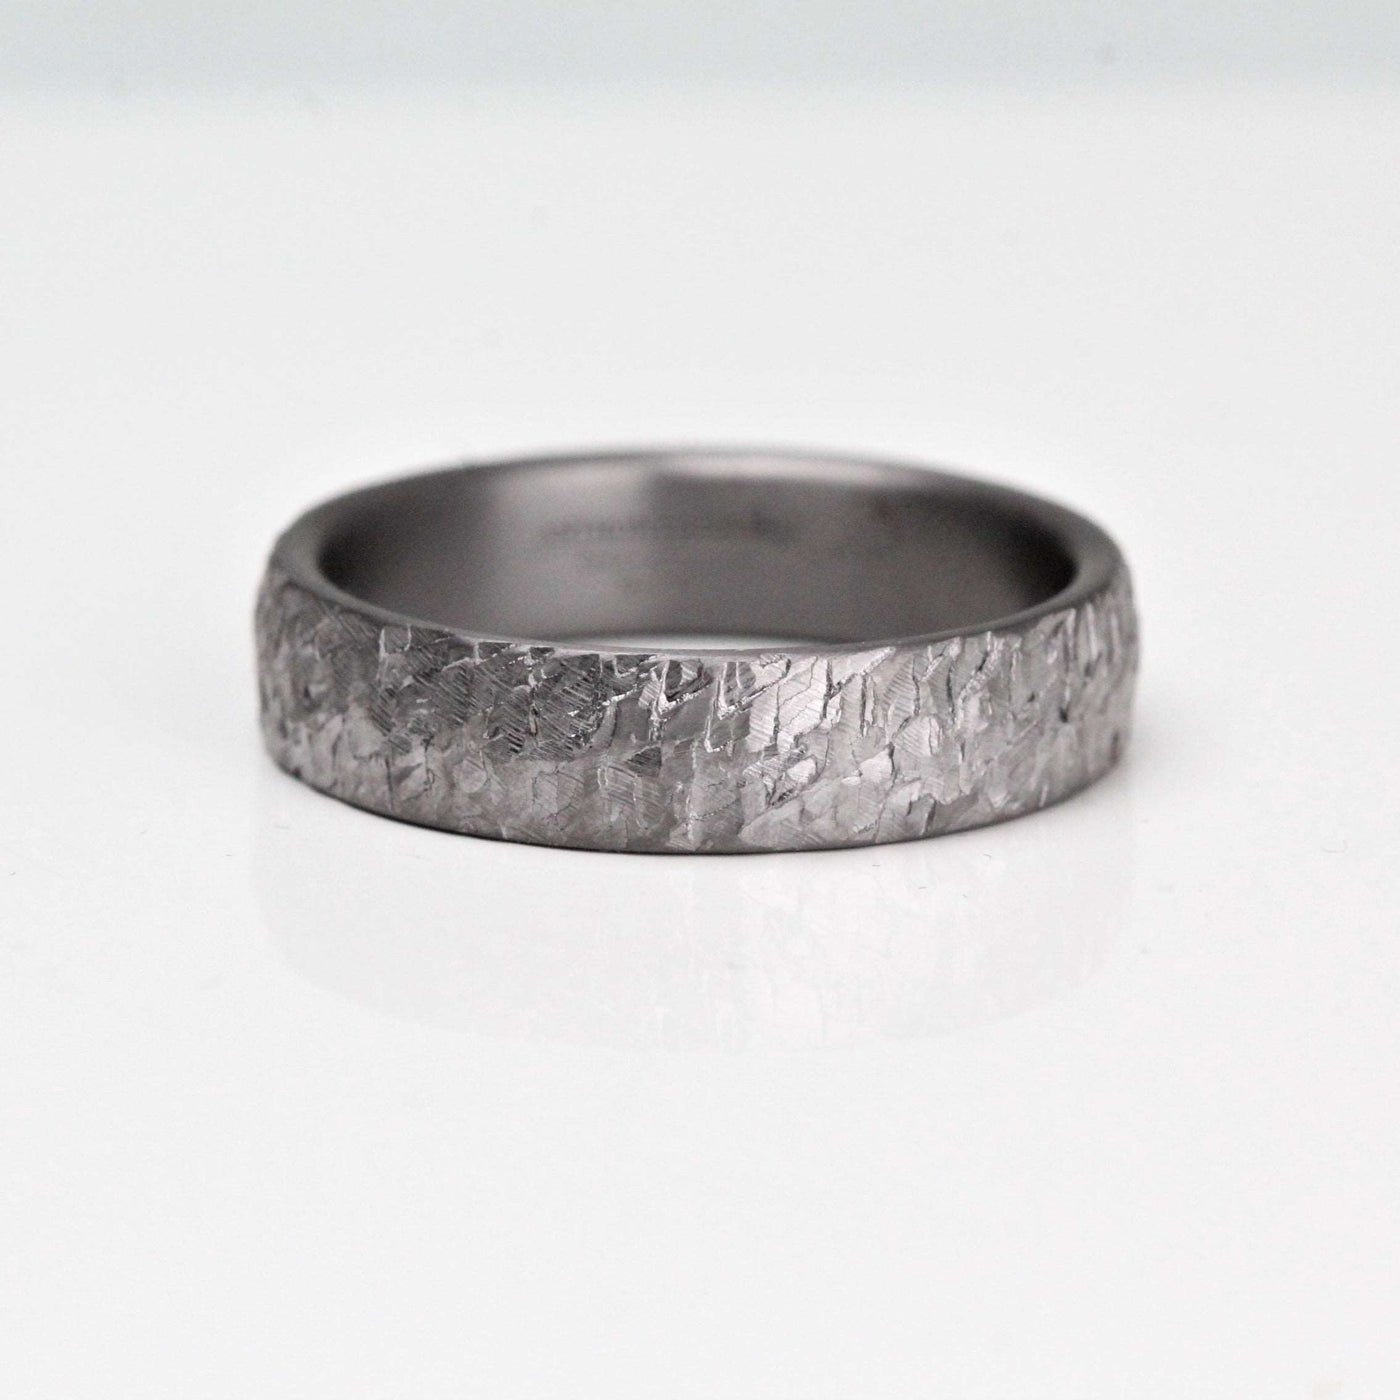 TANTALUM - Structured surface, Ultra comfort fit, Wedding Ring (5 to 6mm)